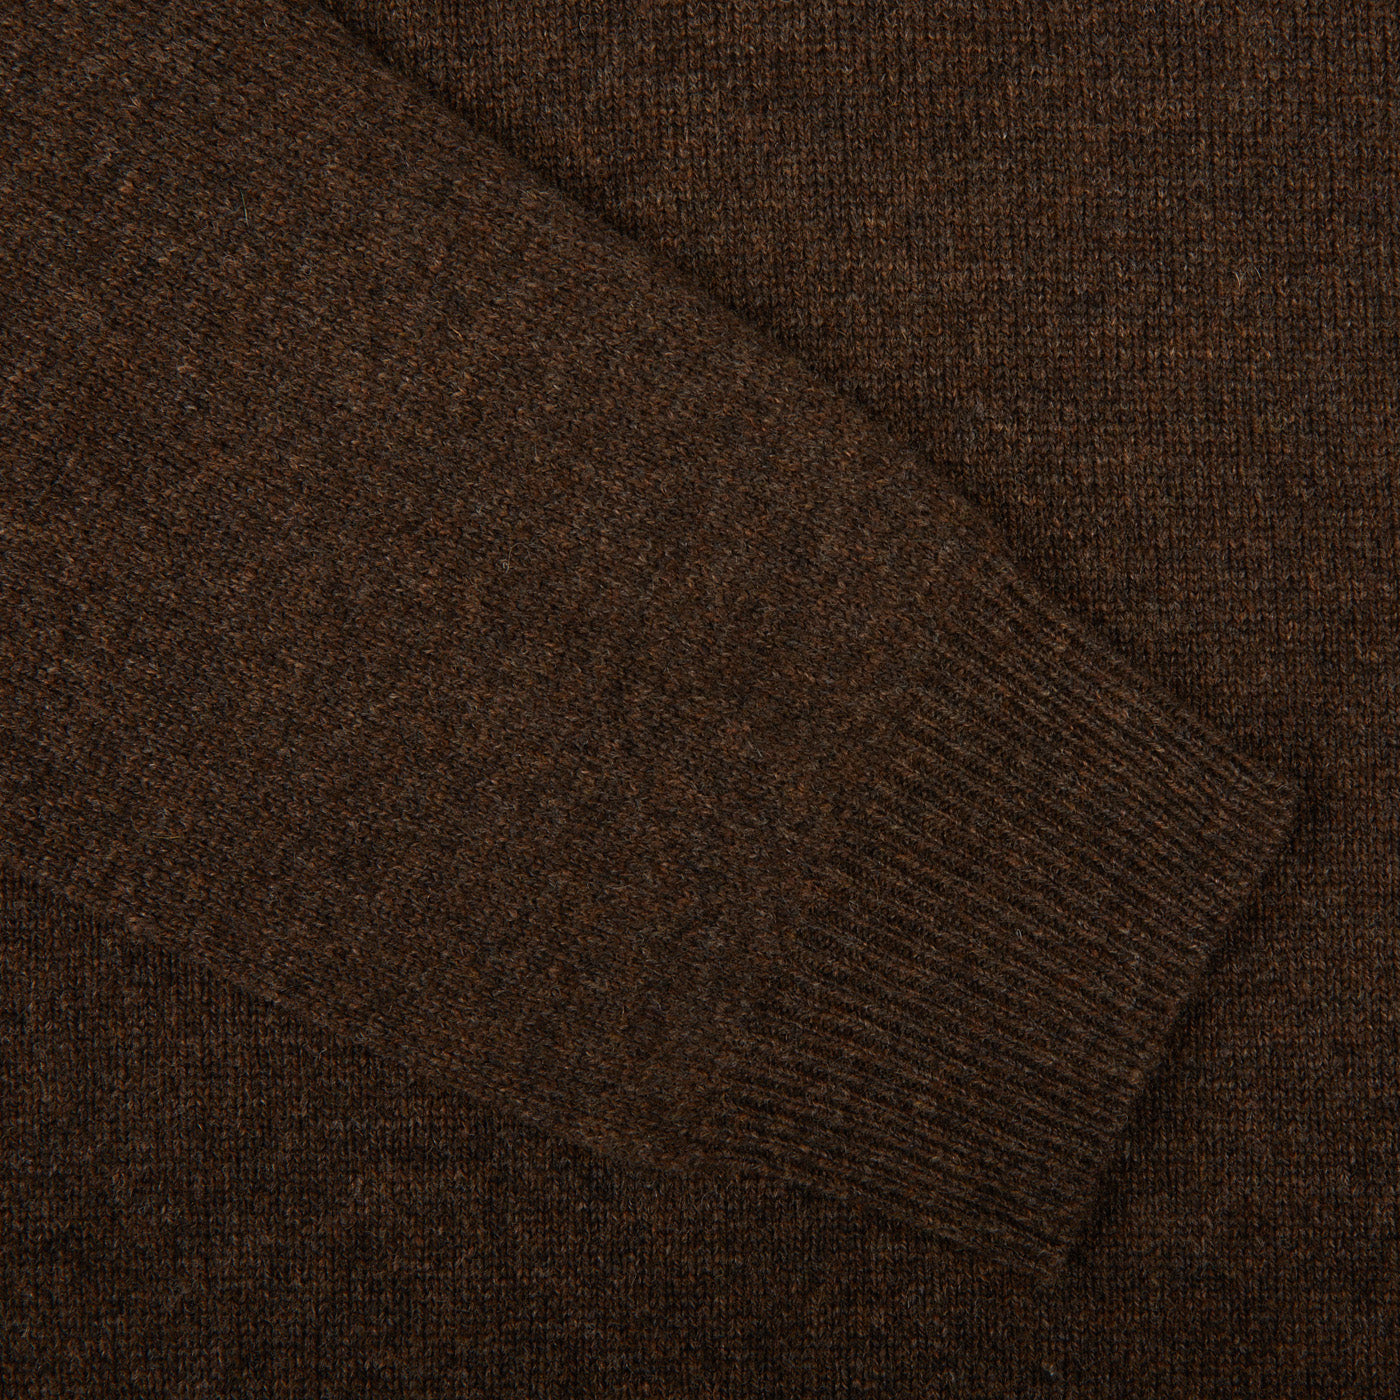 Alan Paine Cocoa Brown Lambswool V-Neck Cuff